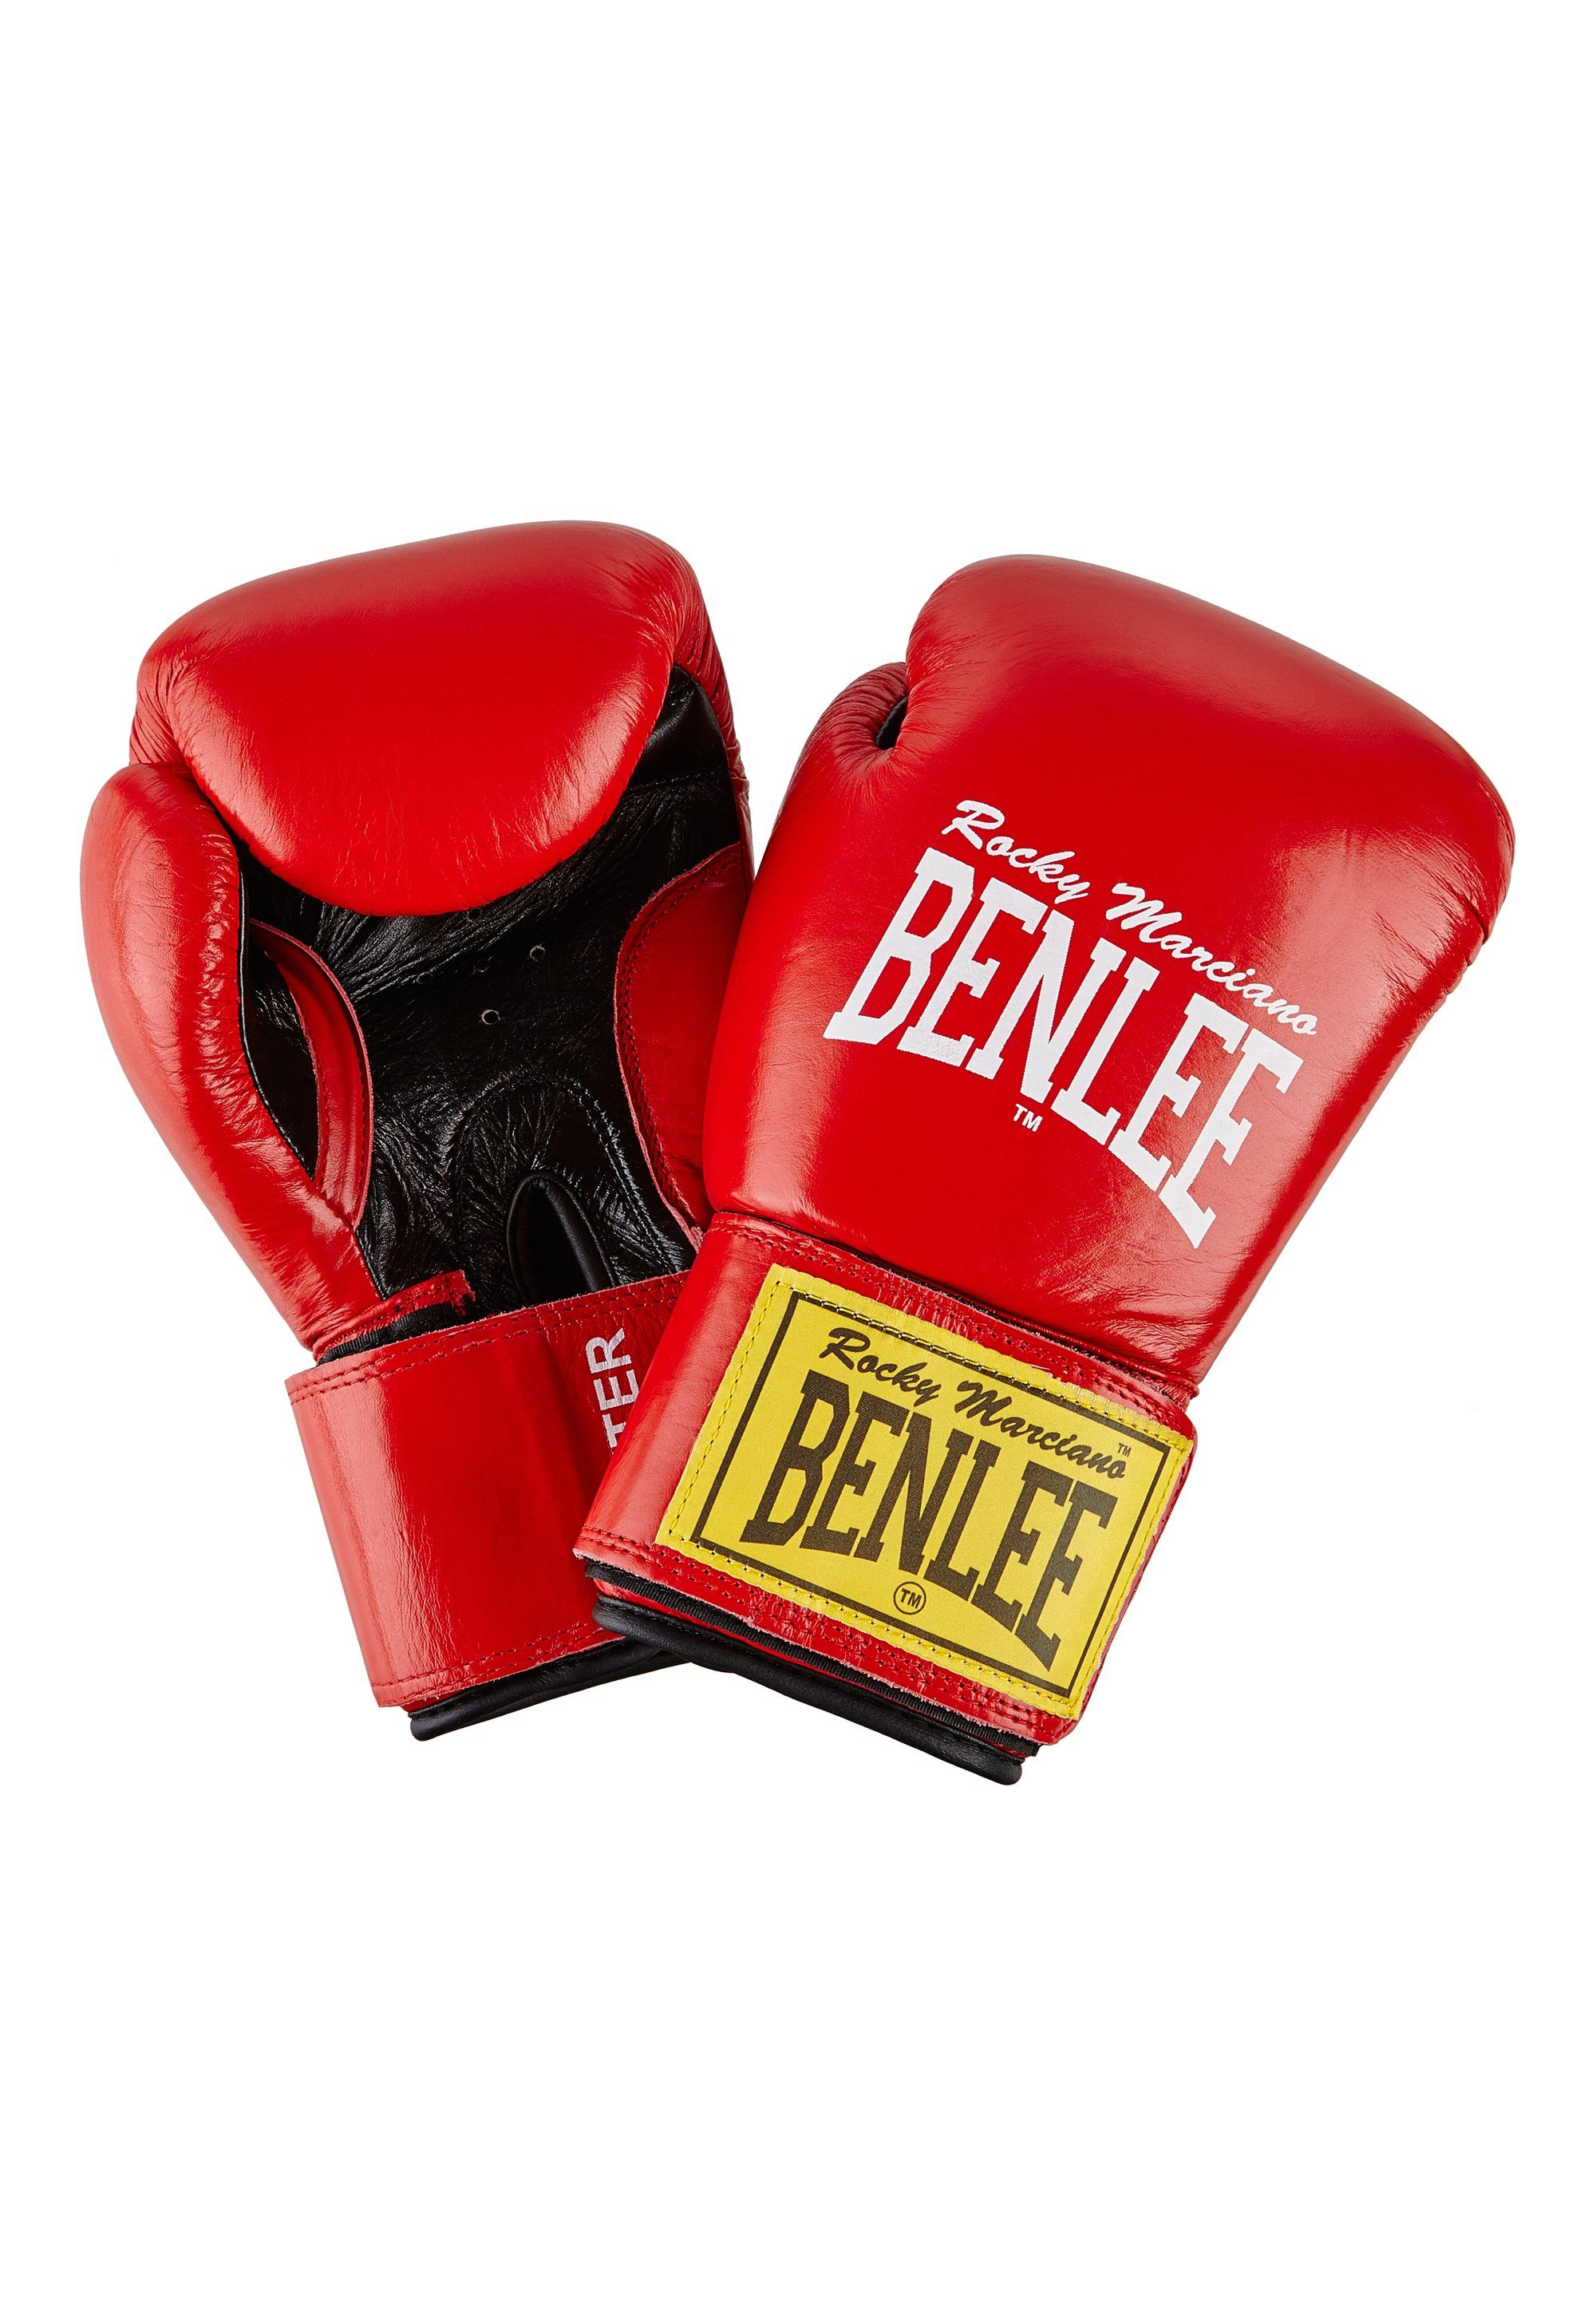 Benlee Rocky Boxhandschuhe FIGHTER Marciano Red/Black